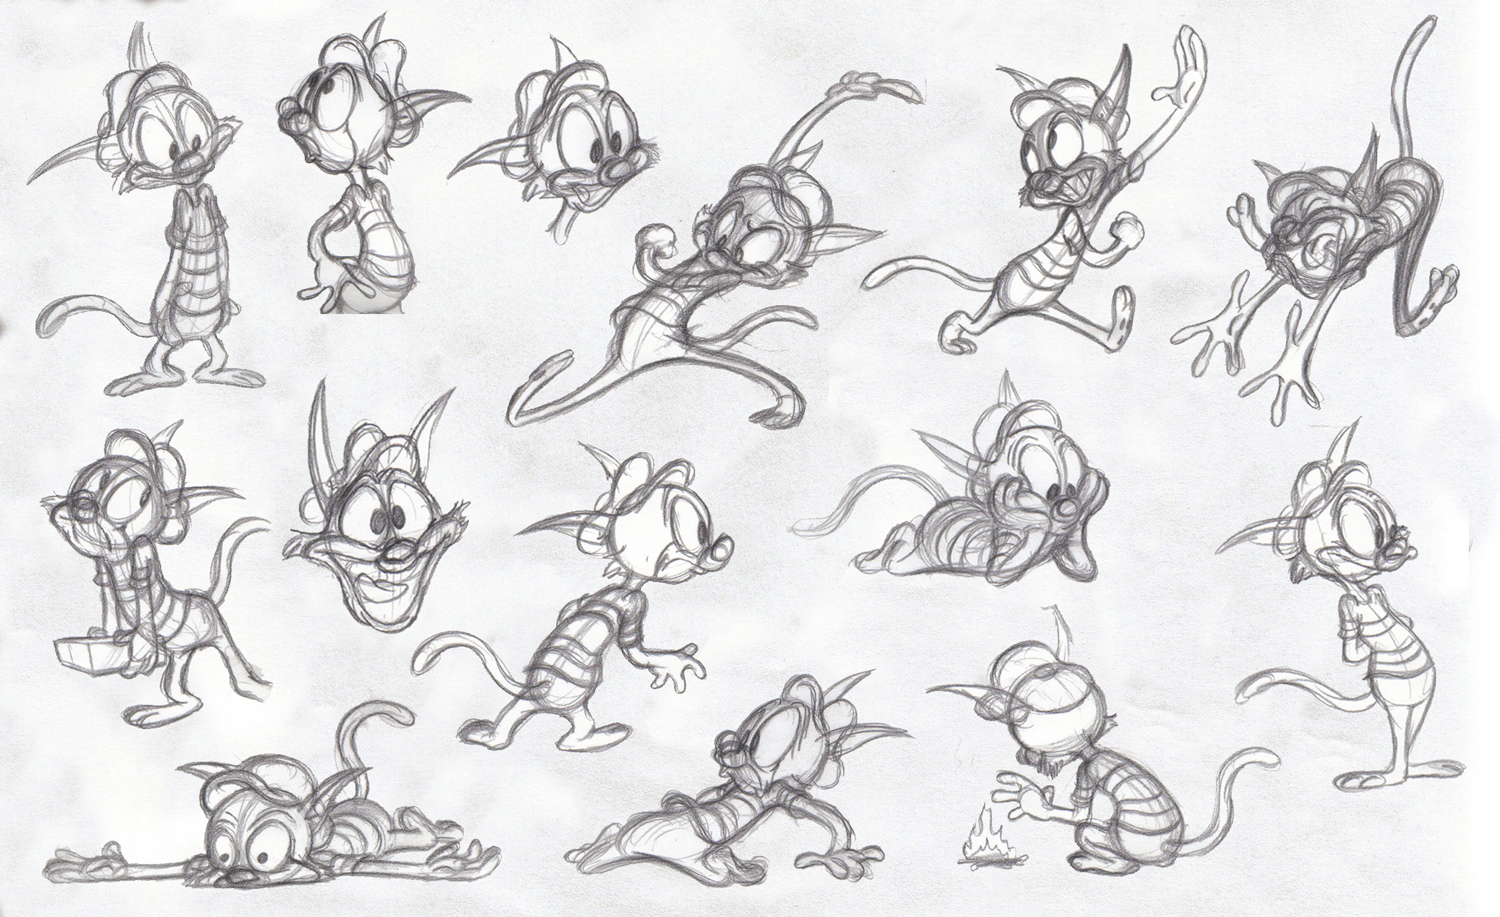 stevie the cat sketches by brien-likes-cartoons on DeviantArt